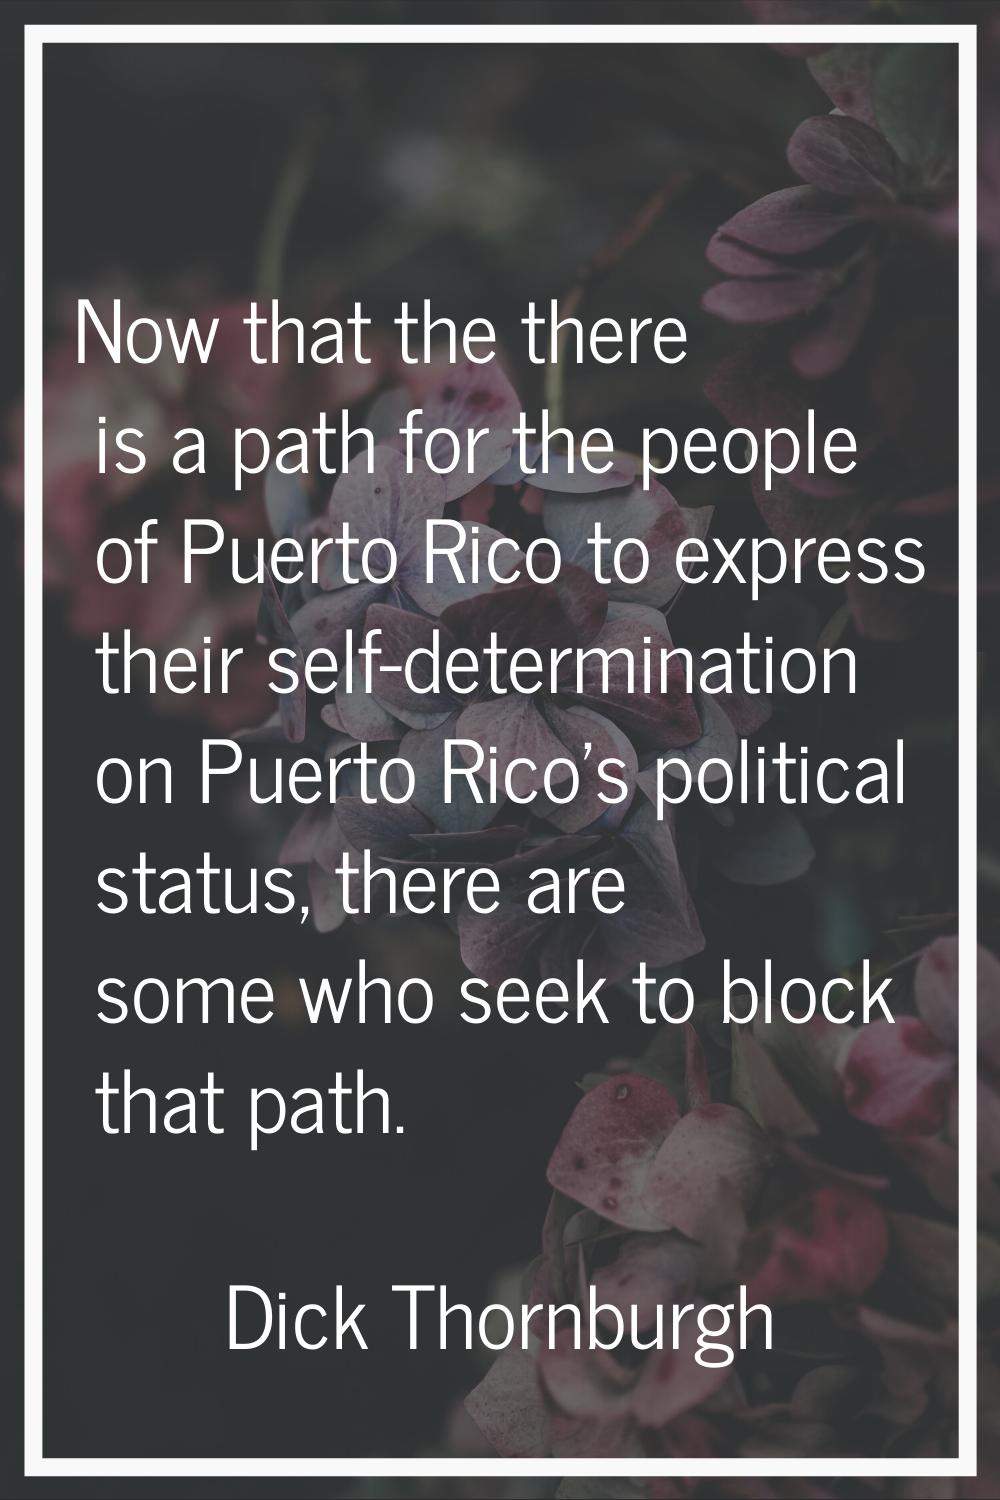 Now that the there is a path for the people of Puerto Rico to express their self-determination on P